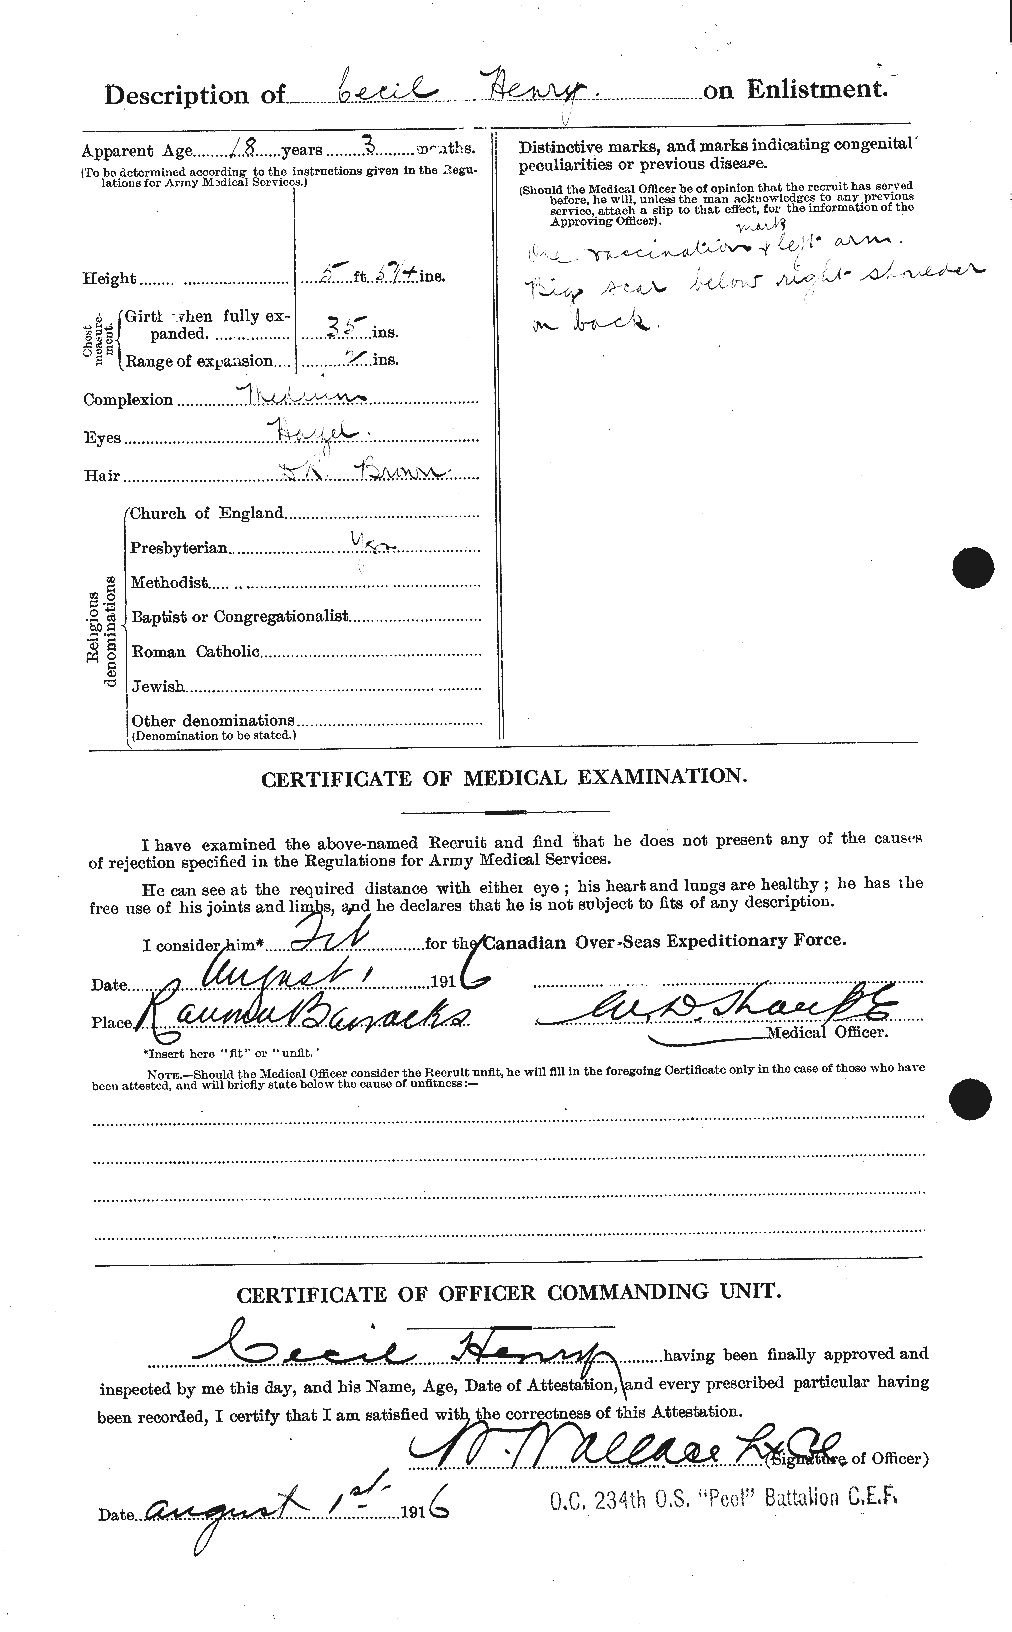 Personnel Records of the First World War - CEF 392796b